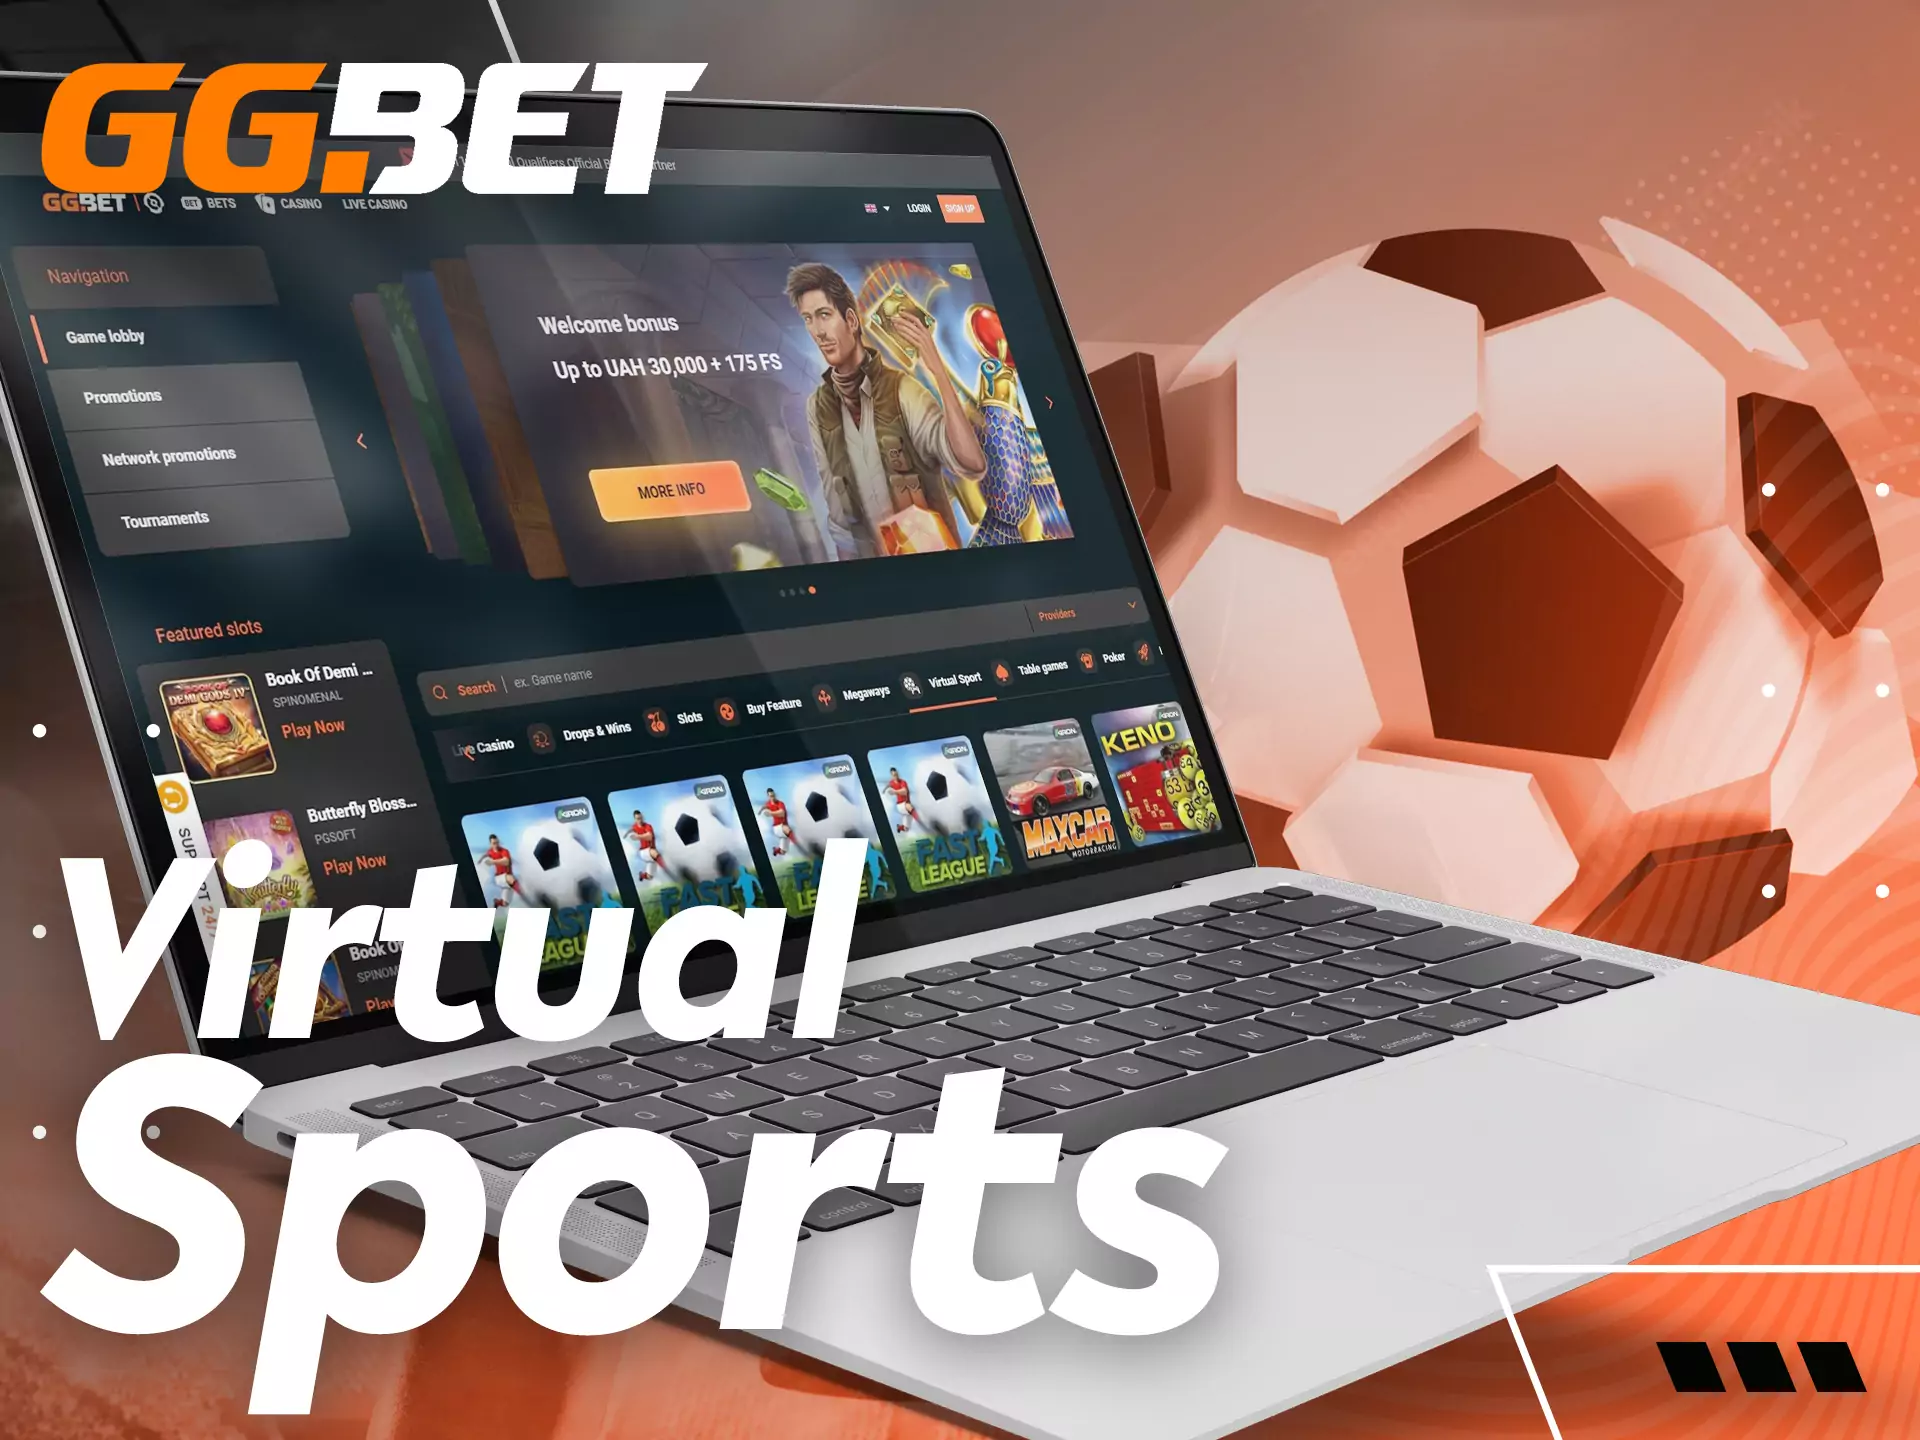 Besides traditional sports and esports matches, you can bet on Virtual Sports in the GGBet Casino.